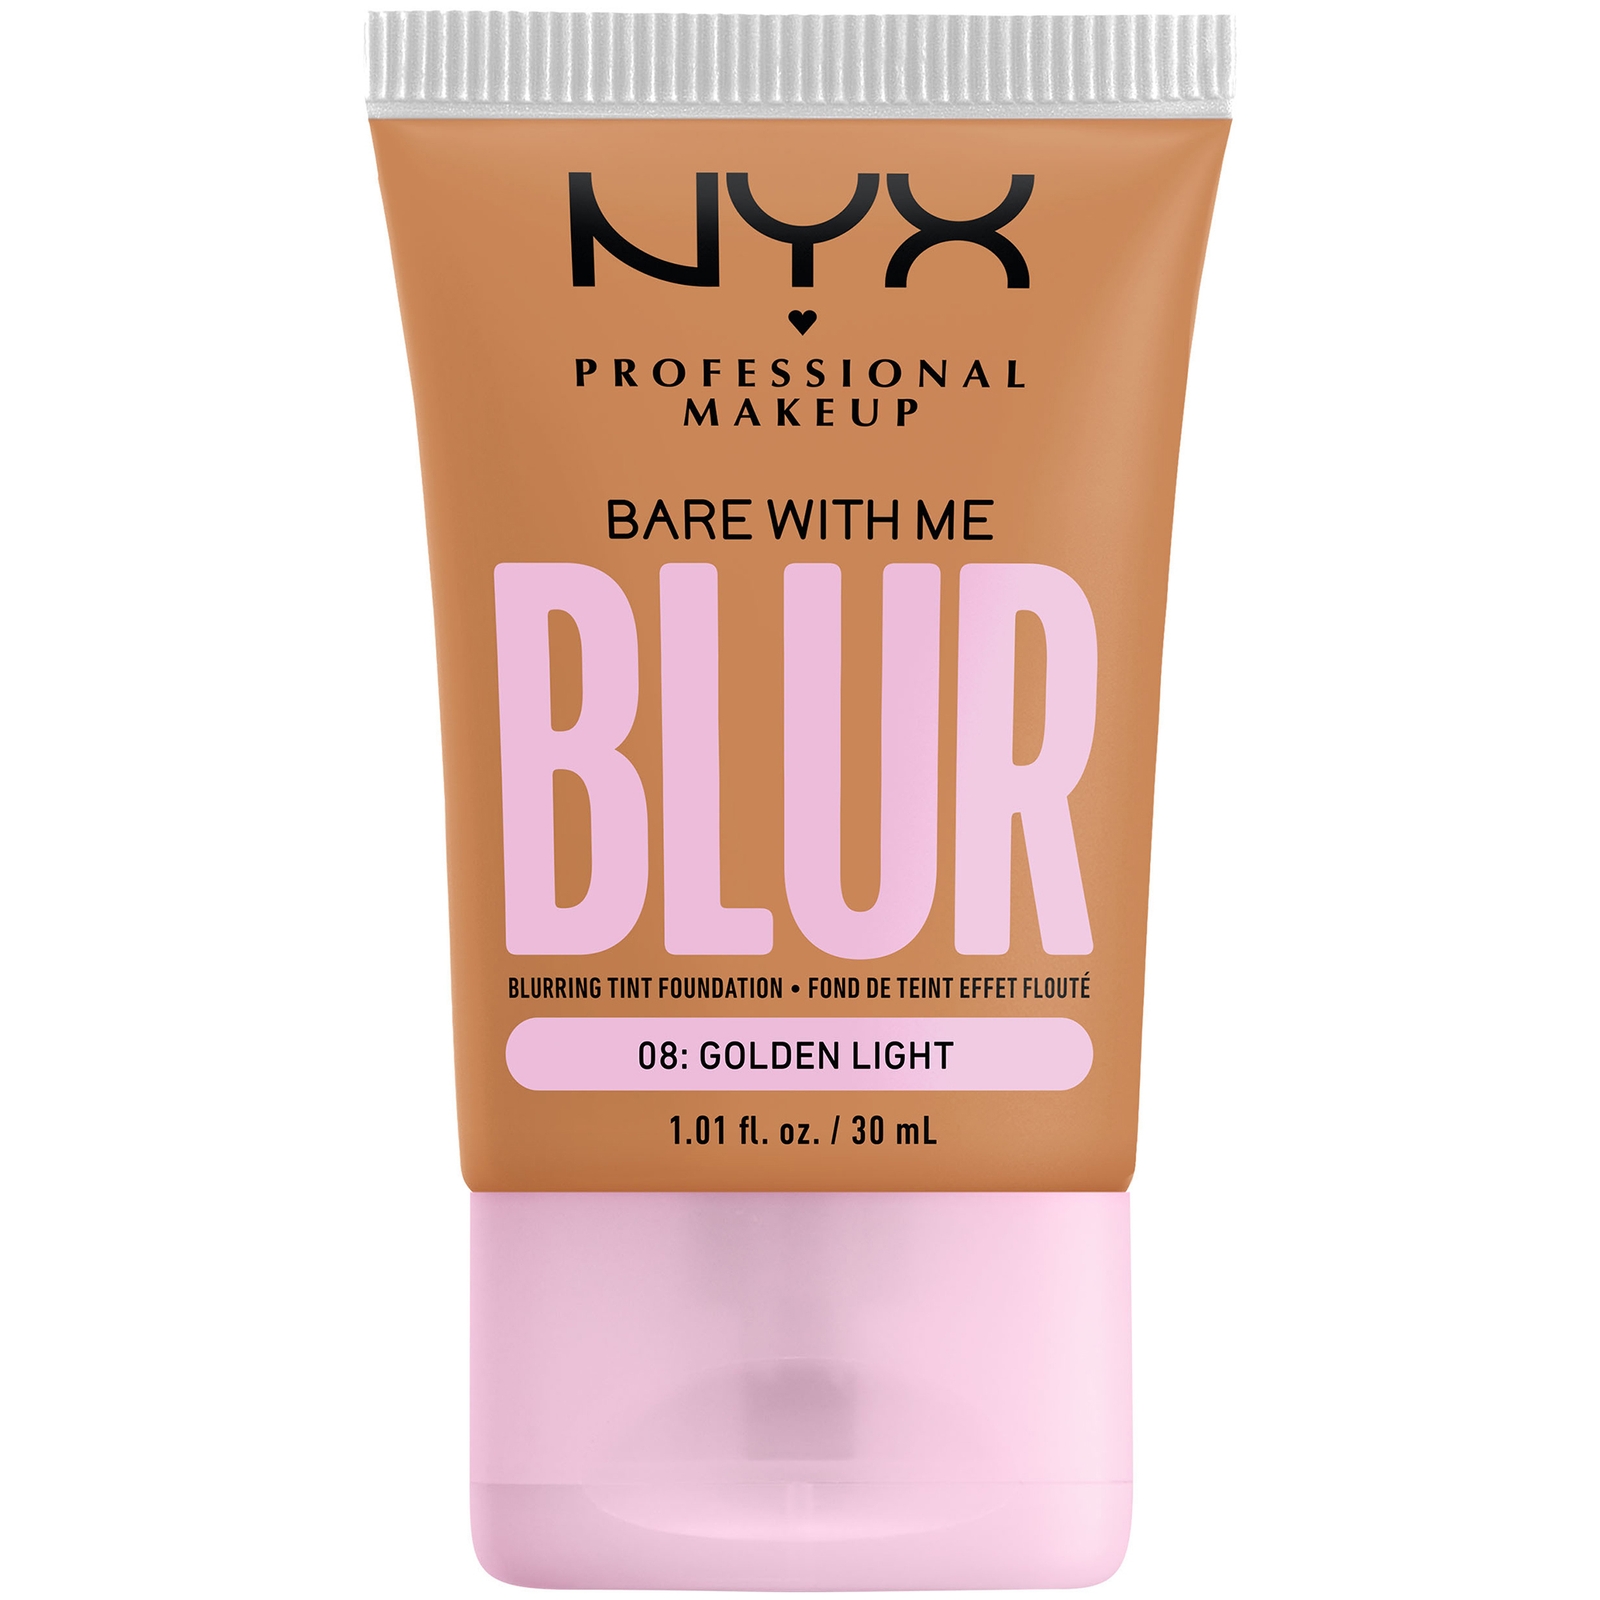 Nyx Professional Makeup Bare With Me Blur Tint Foundation 30ml (varios Shades) - Golden Light In White